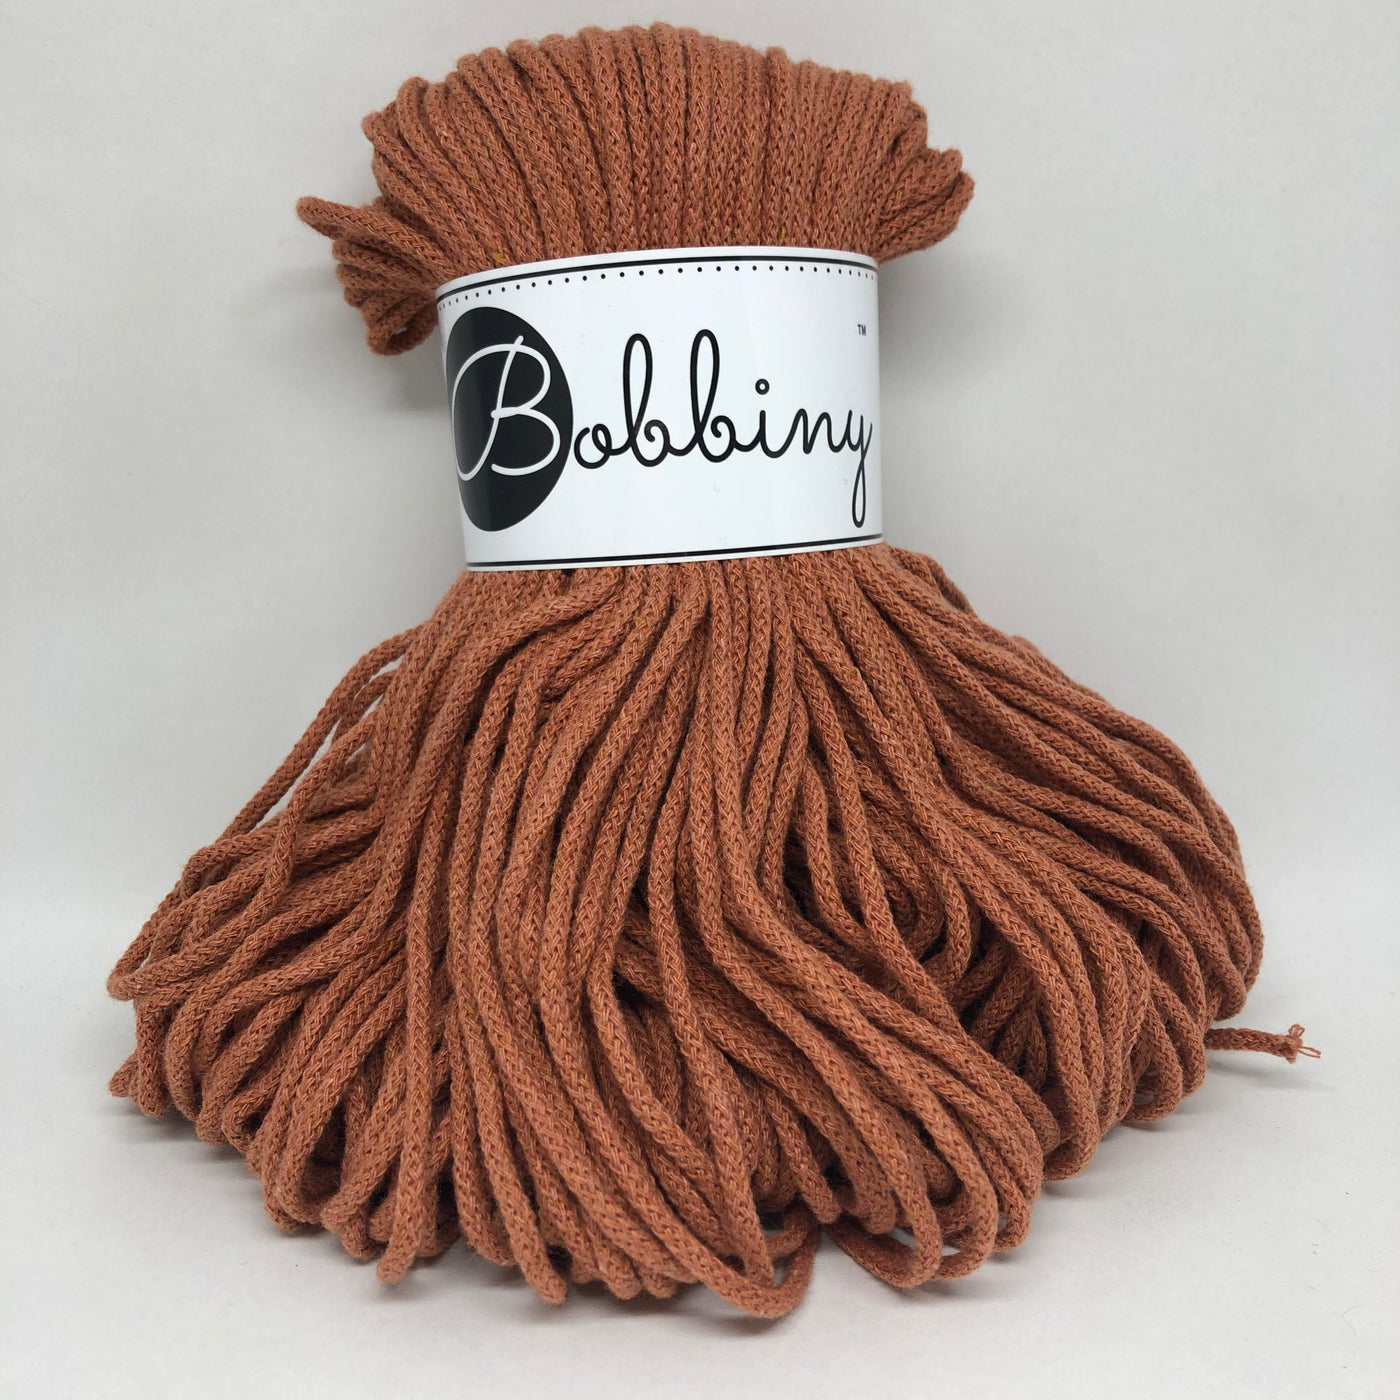 These beautiful Bobbiny ropes are made in Poland, and are non-toxic and certified safe for children, meeting certified worldwide textile standards.  3mm Diameter  100 metres Length  Recommended for use with 8-10mm crochet or knitting needles  Cotton inner and outer layers, perfect for use with Macrame, Crochet or Knitting